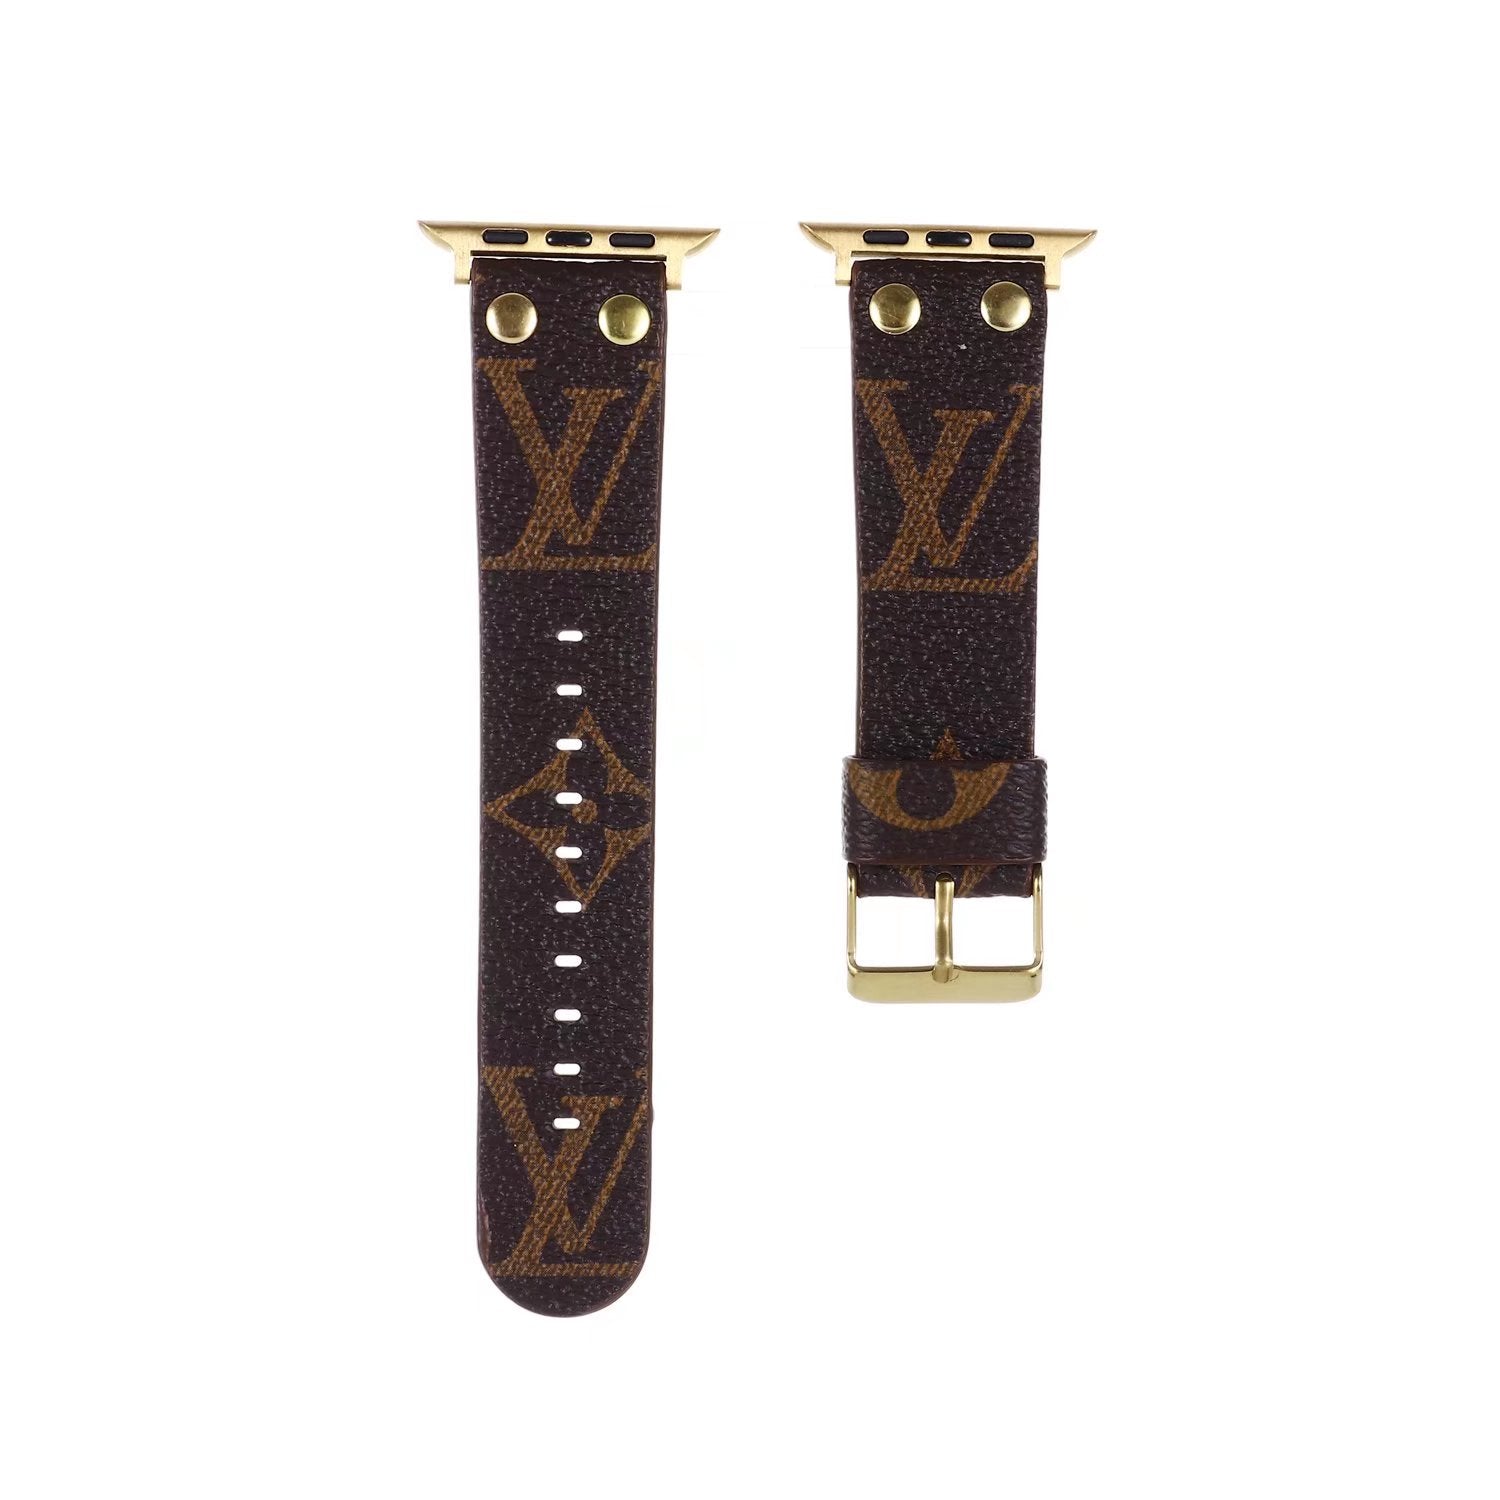 Luxury Louis Watch Bands v2 in brown